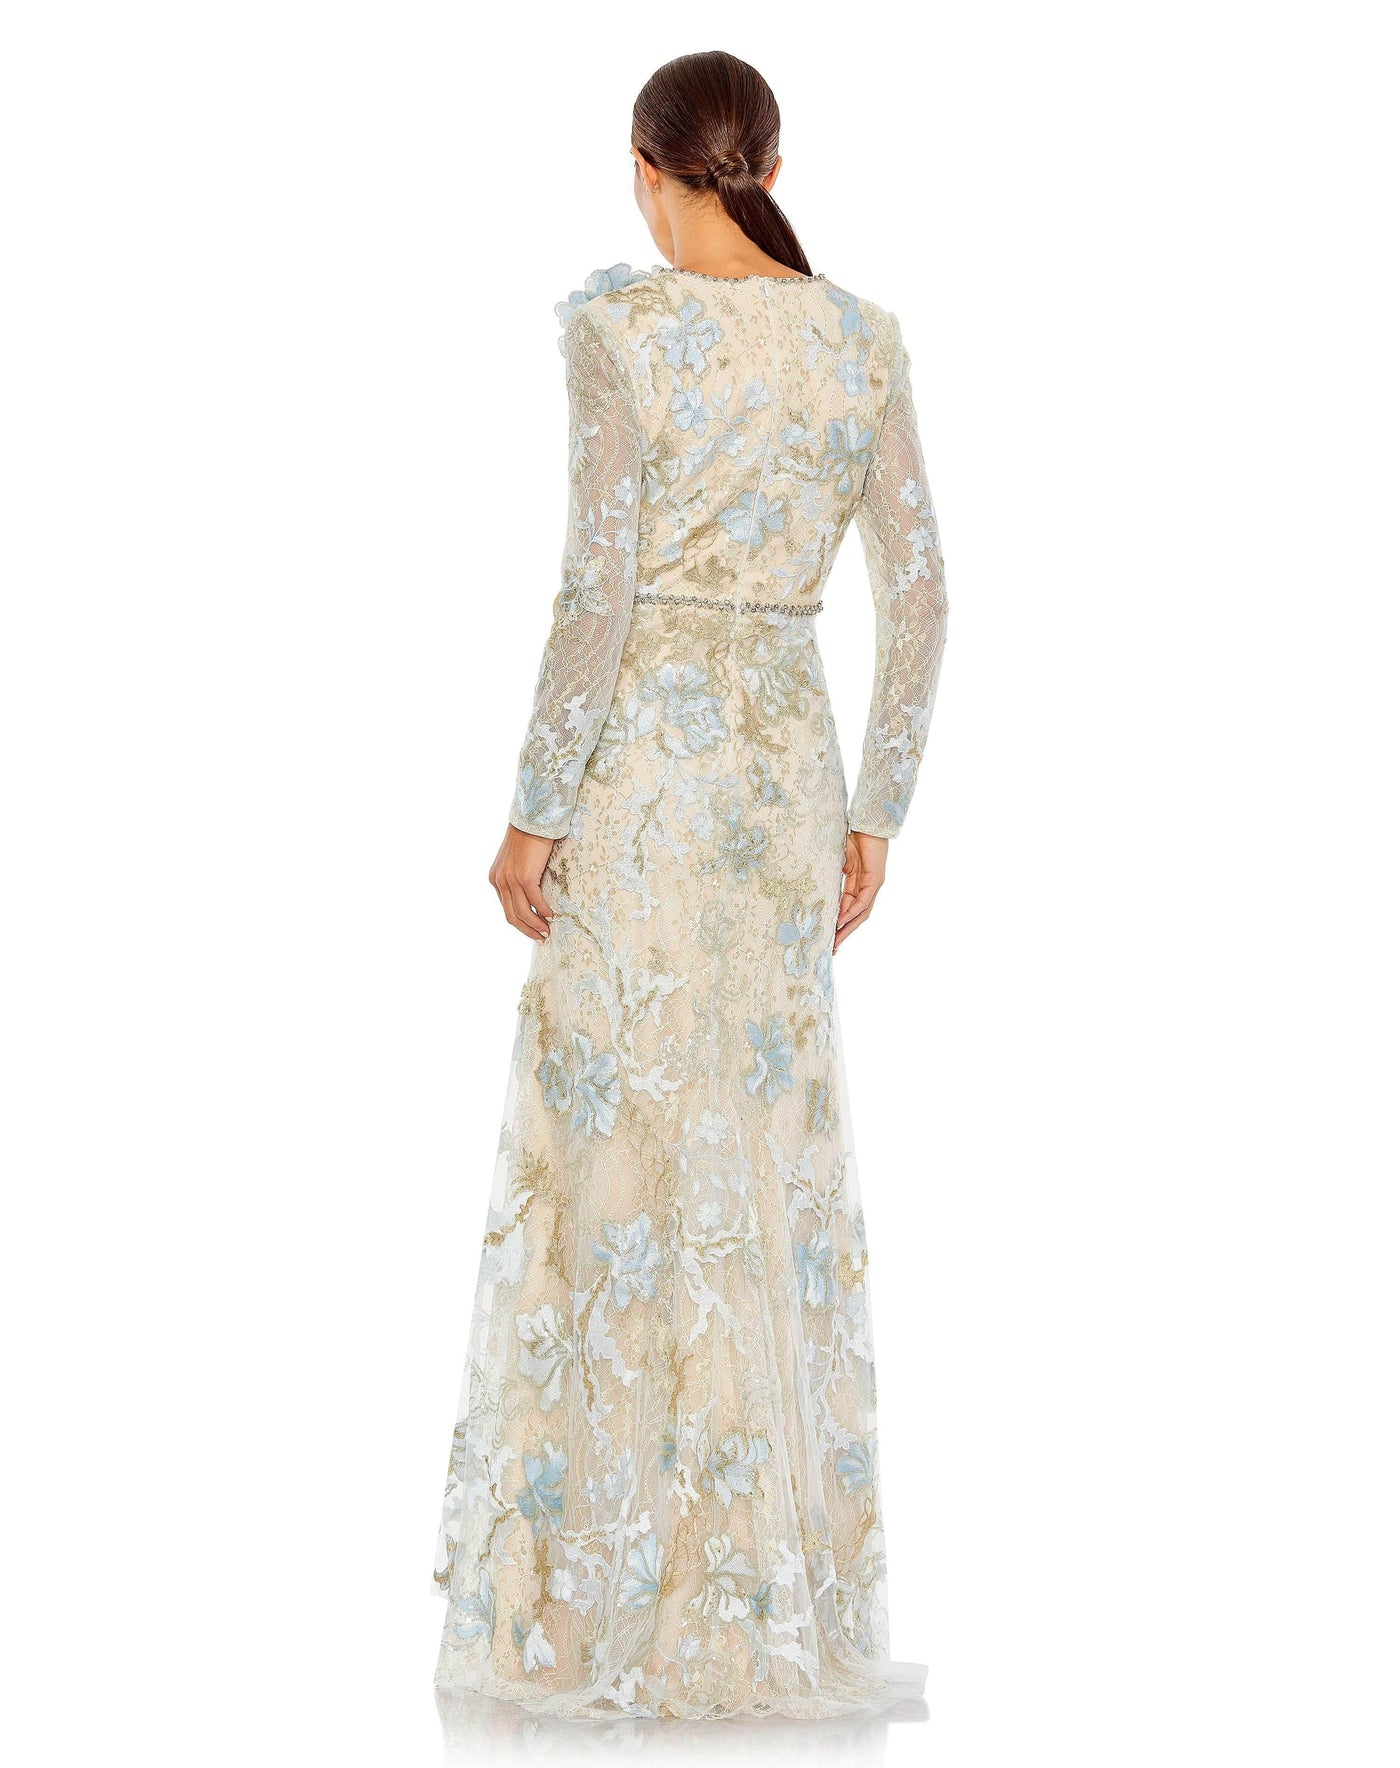 Mac Duggal - 11174 Long Sleeve Floral Mother of the Groom Gown Evening Dresses